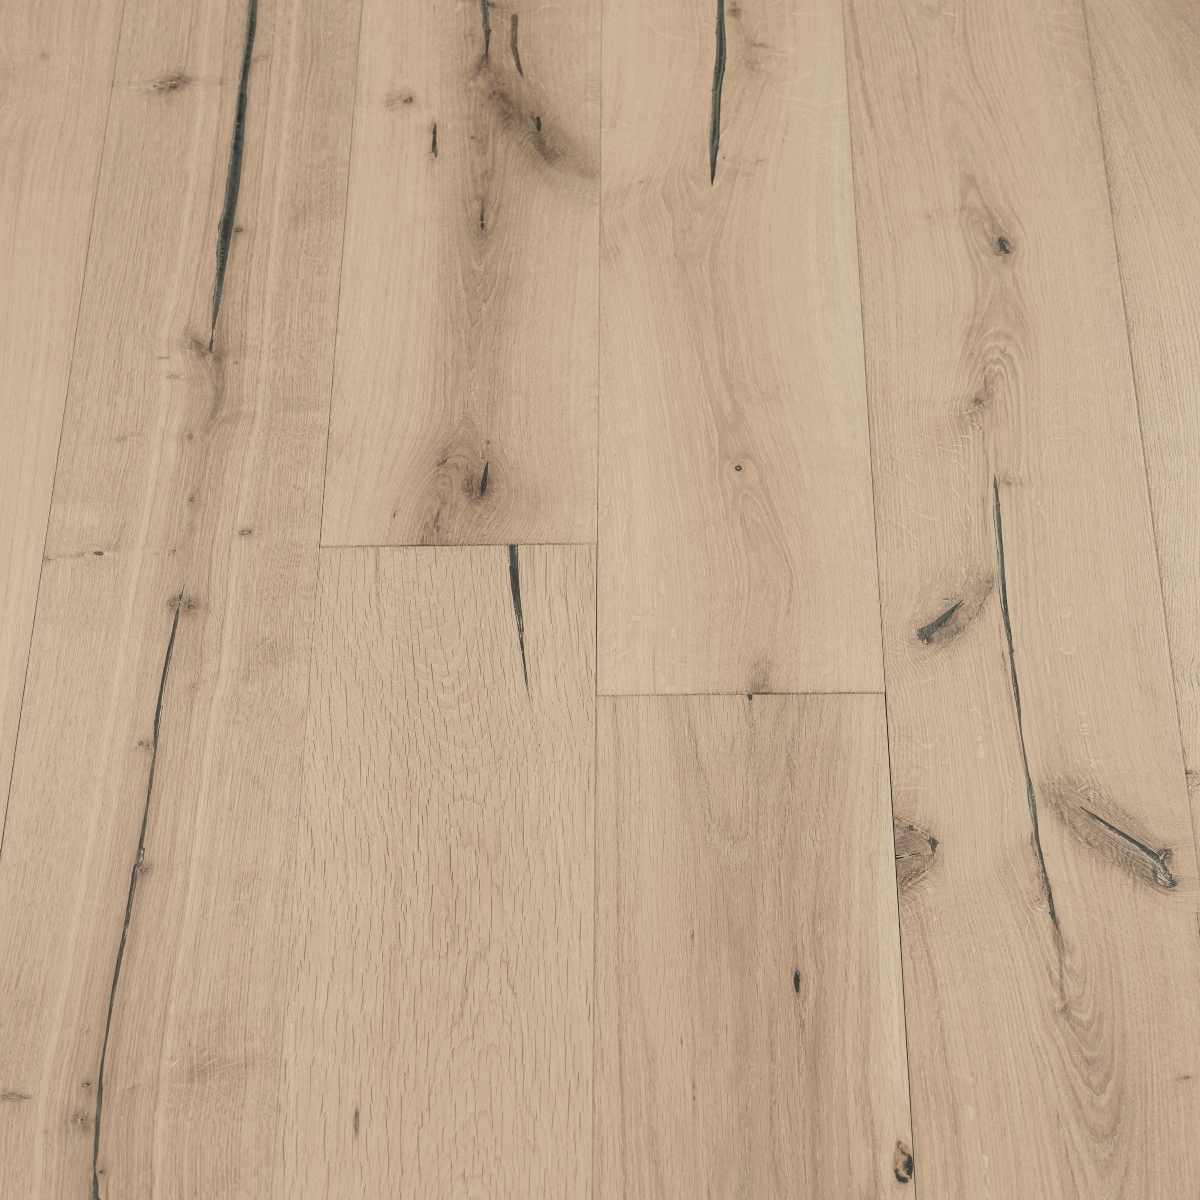 Distressed Sand Woodflooring - image featuring distressed sand-colored wood flooring with a worn and aged appearance, creating a coastal and beachy ambiance.